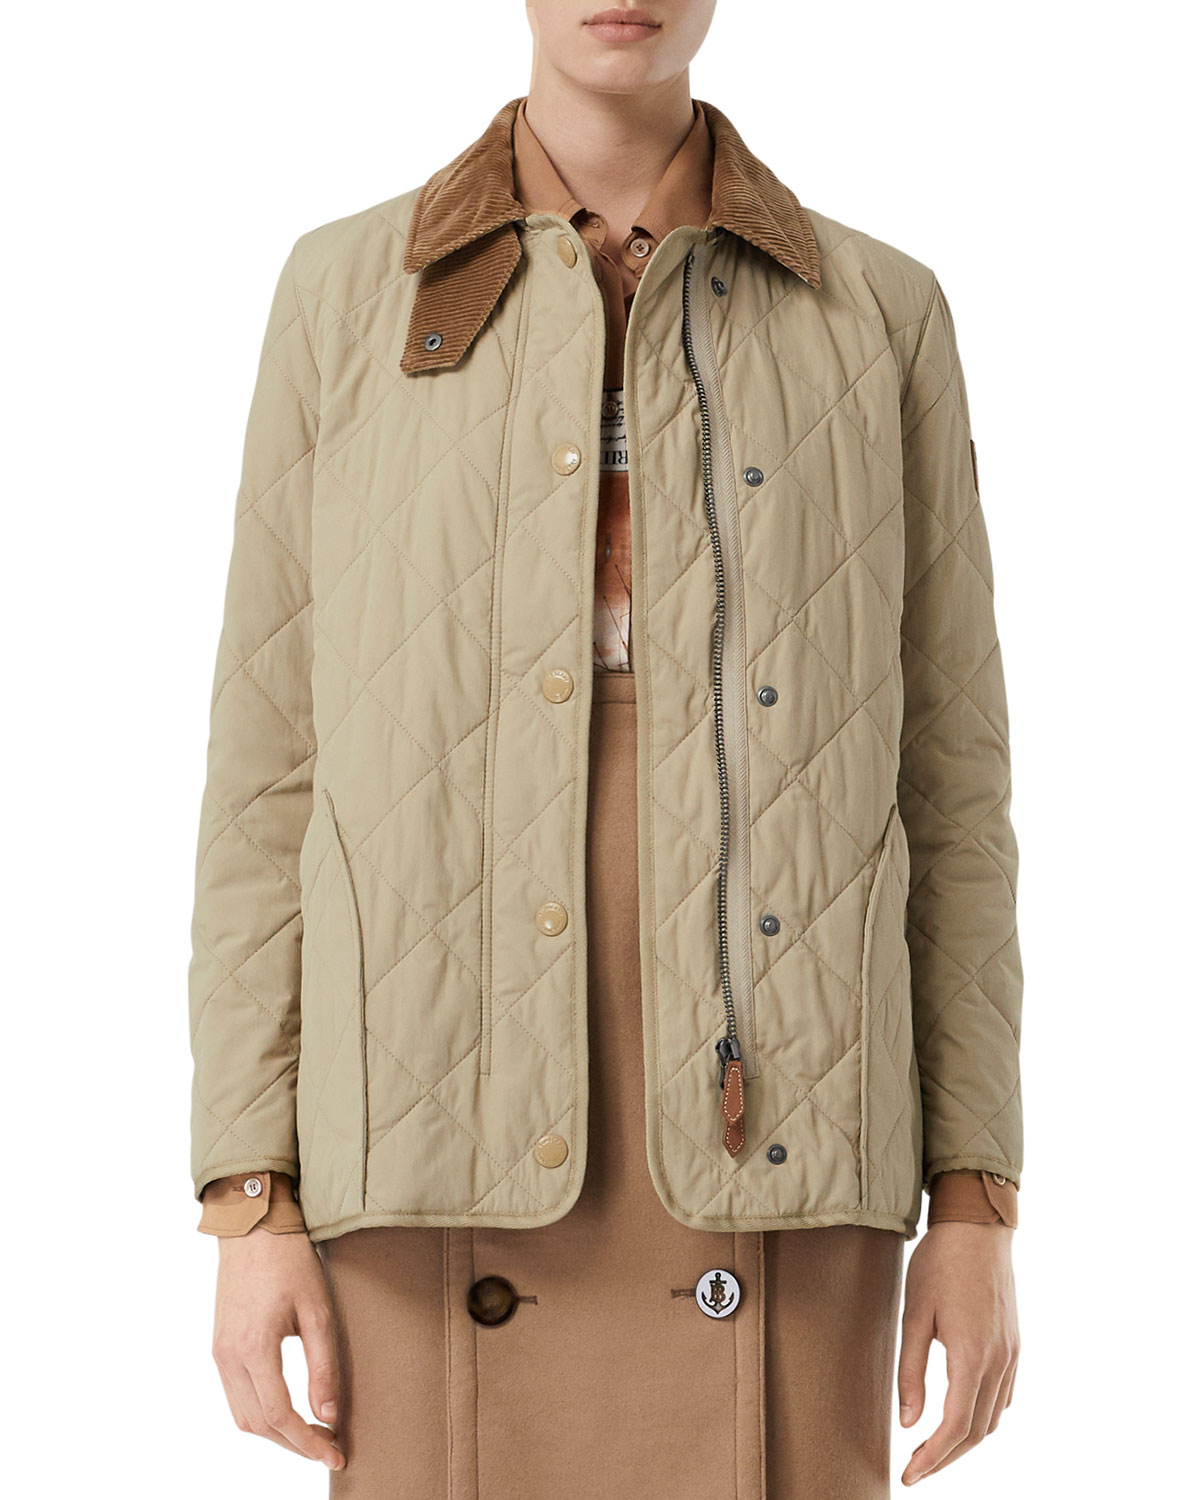 Cotswold Quilted Barn Jacket, Beige